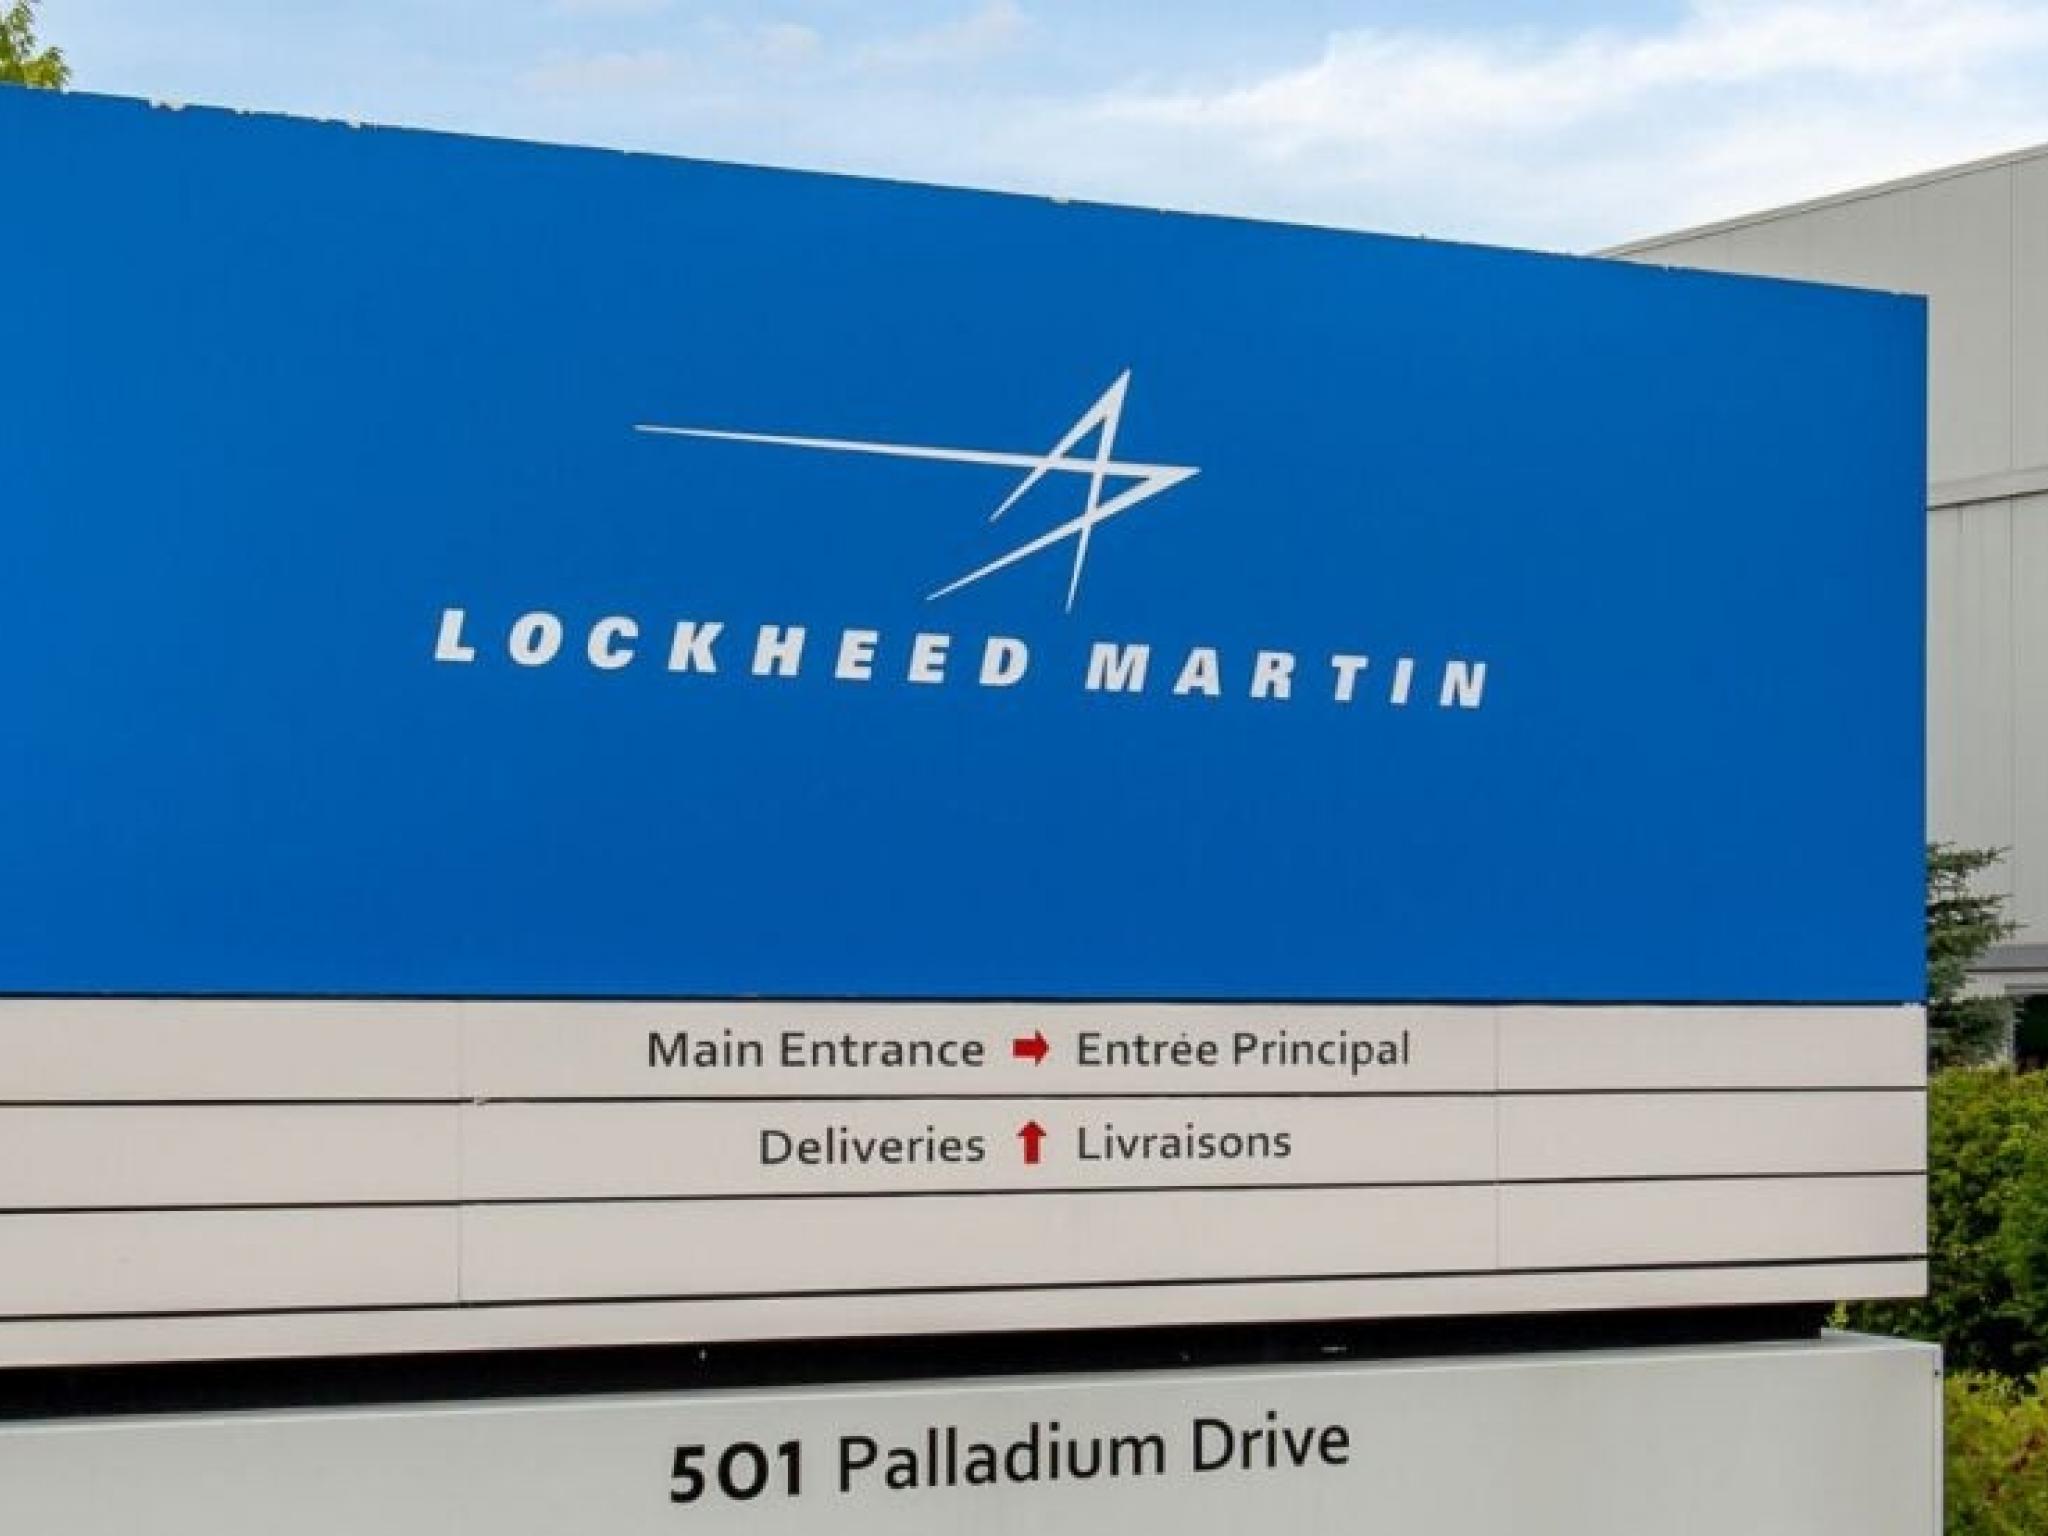  lockheed-martin-te-connectivity-and-more-cnbcs-final-trades 